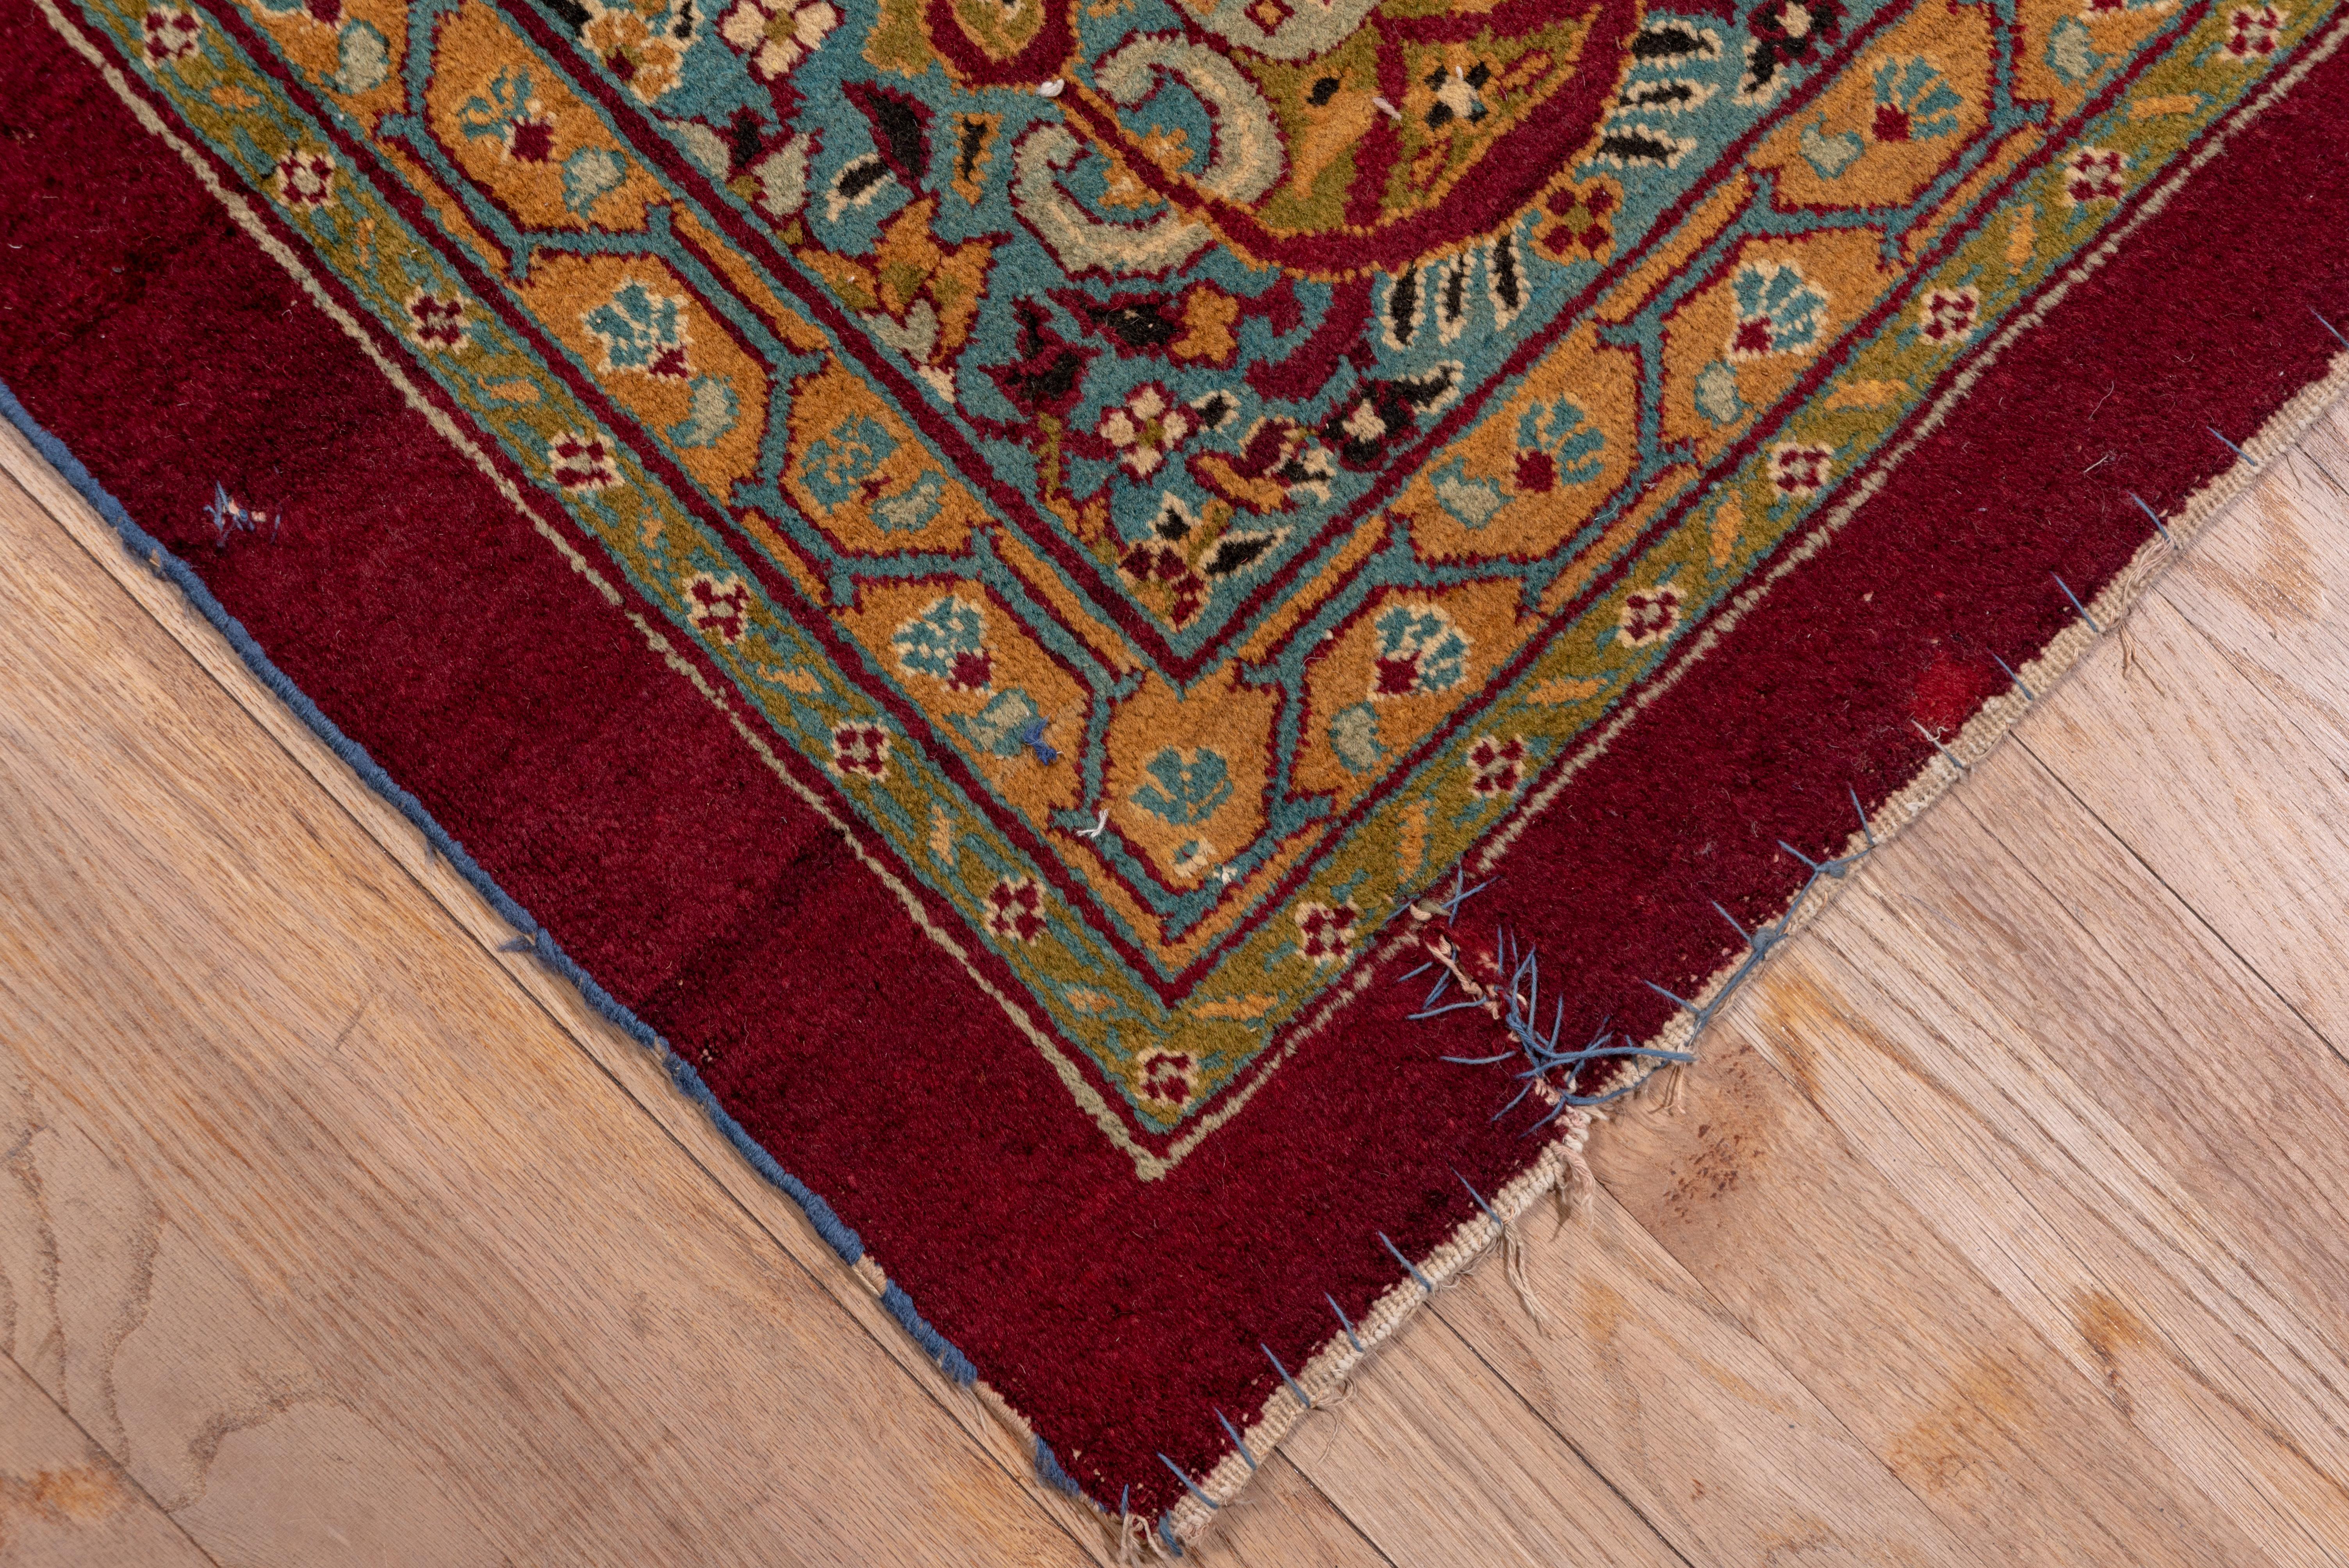 Antique Indian Amritzar Square Carpet, Burgundy Field, Multicolored Borders In Good Condition For Sale In New York, NY